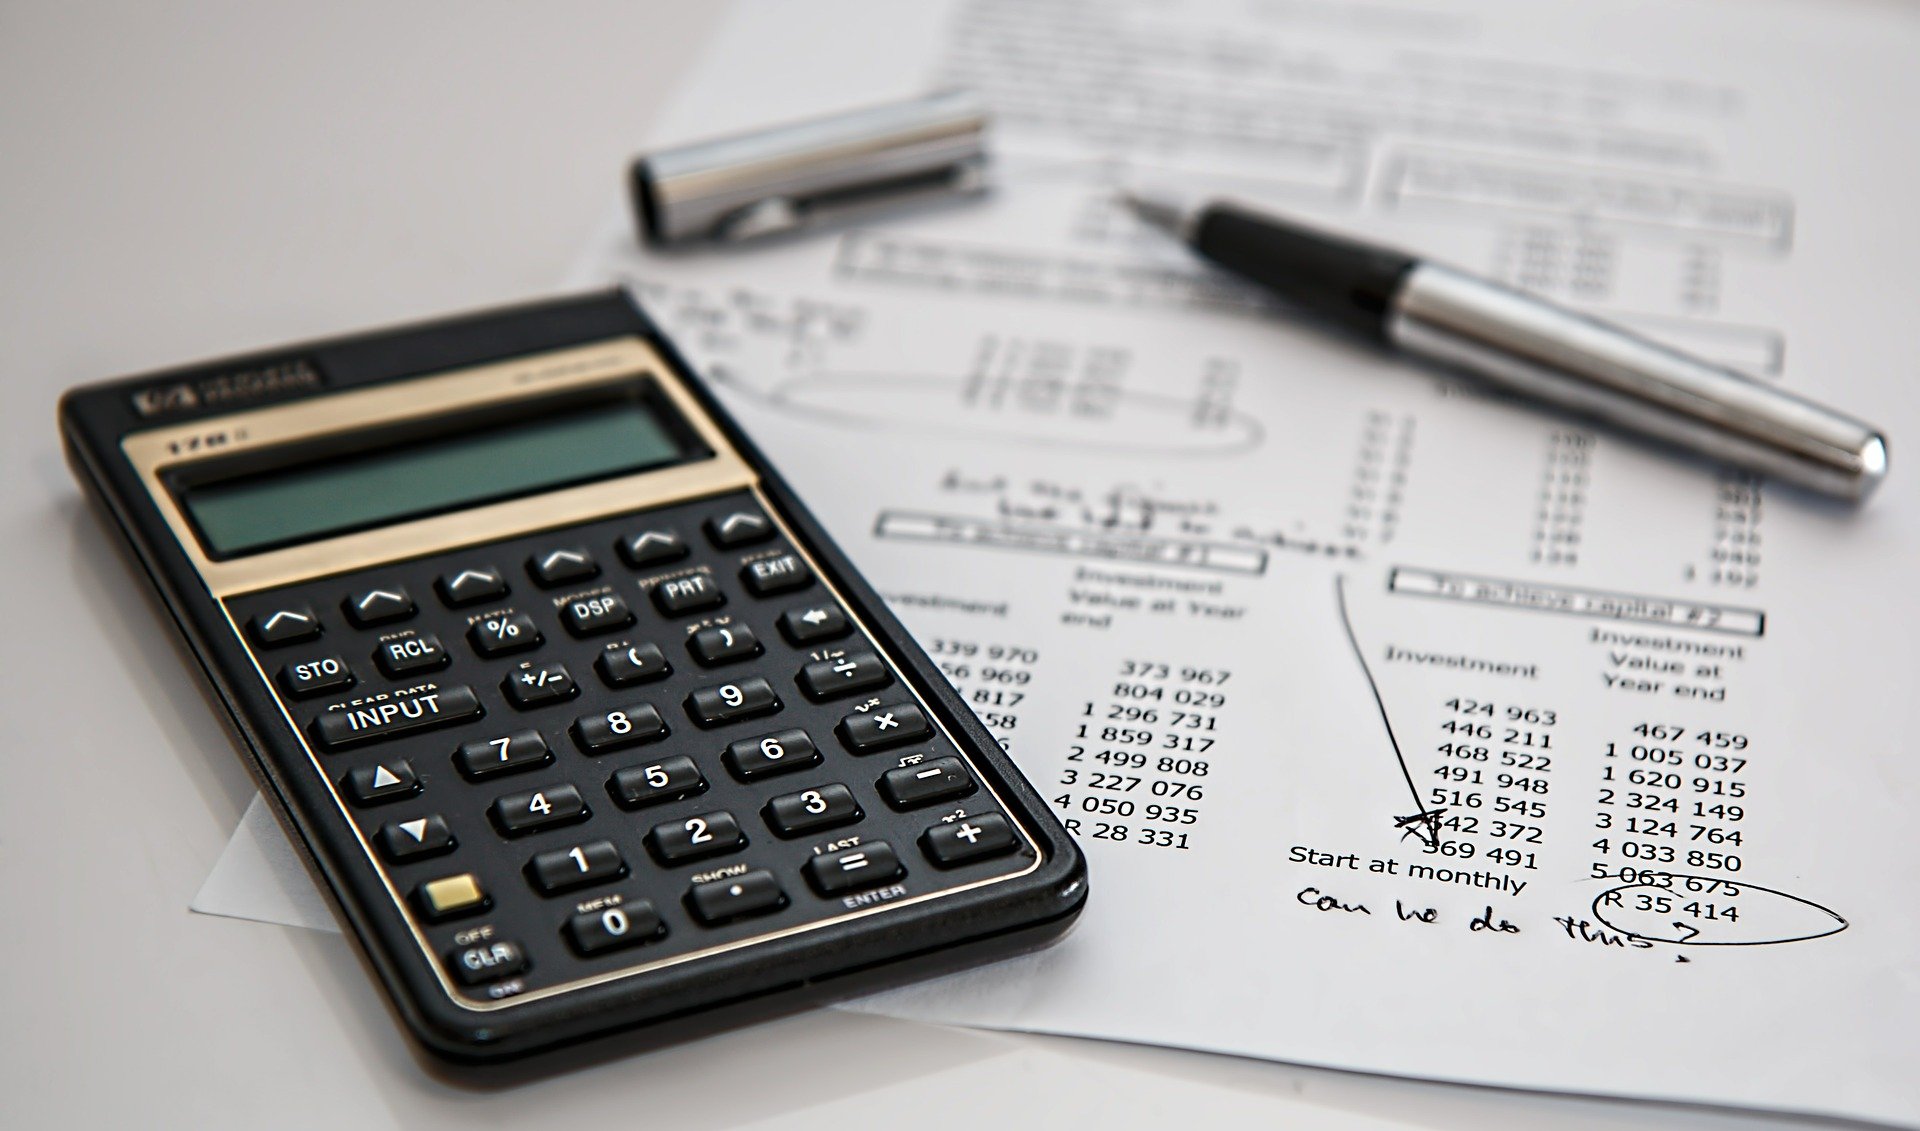 Analysing a hard copy of investments with a calculator to see if they are worth the value